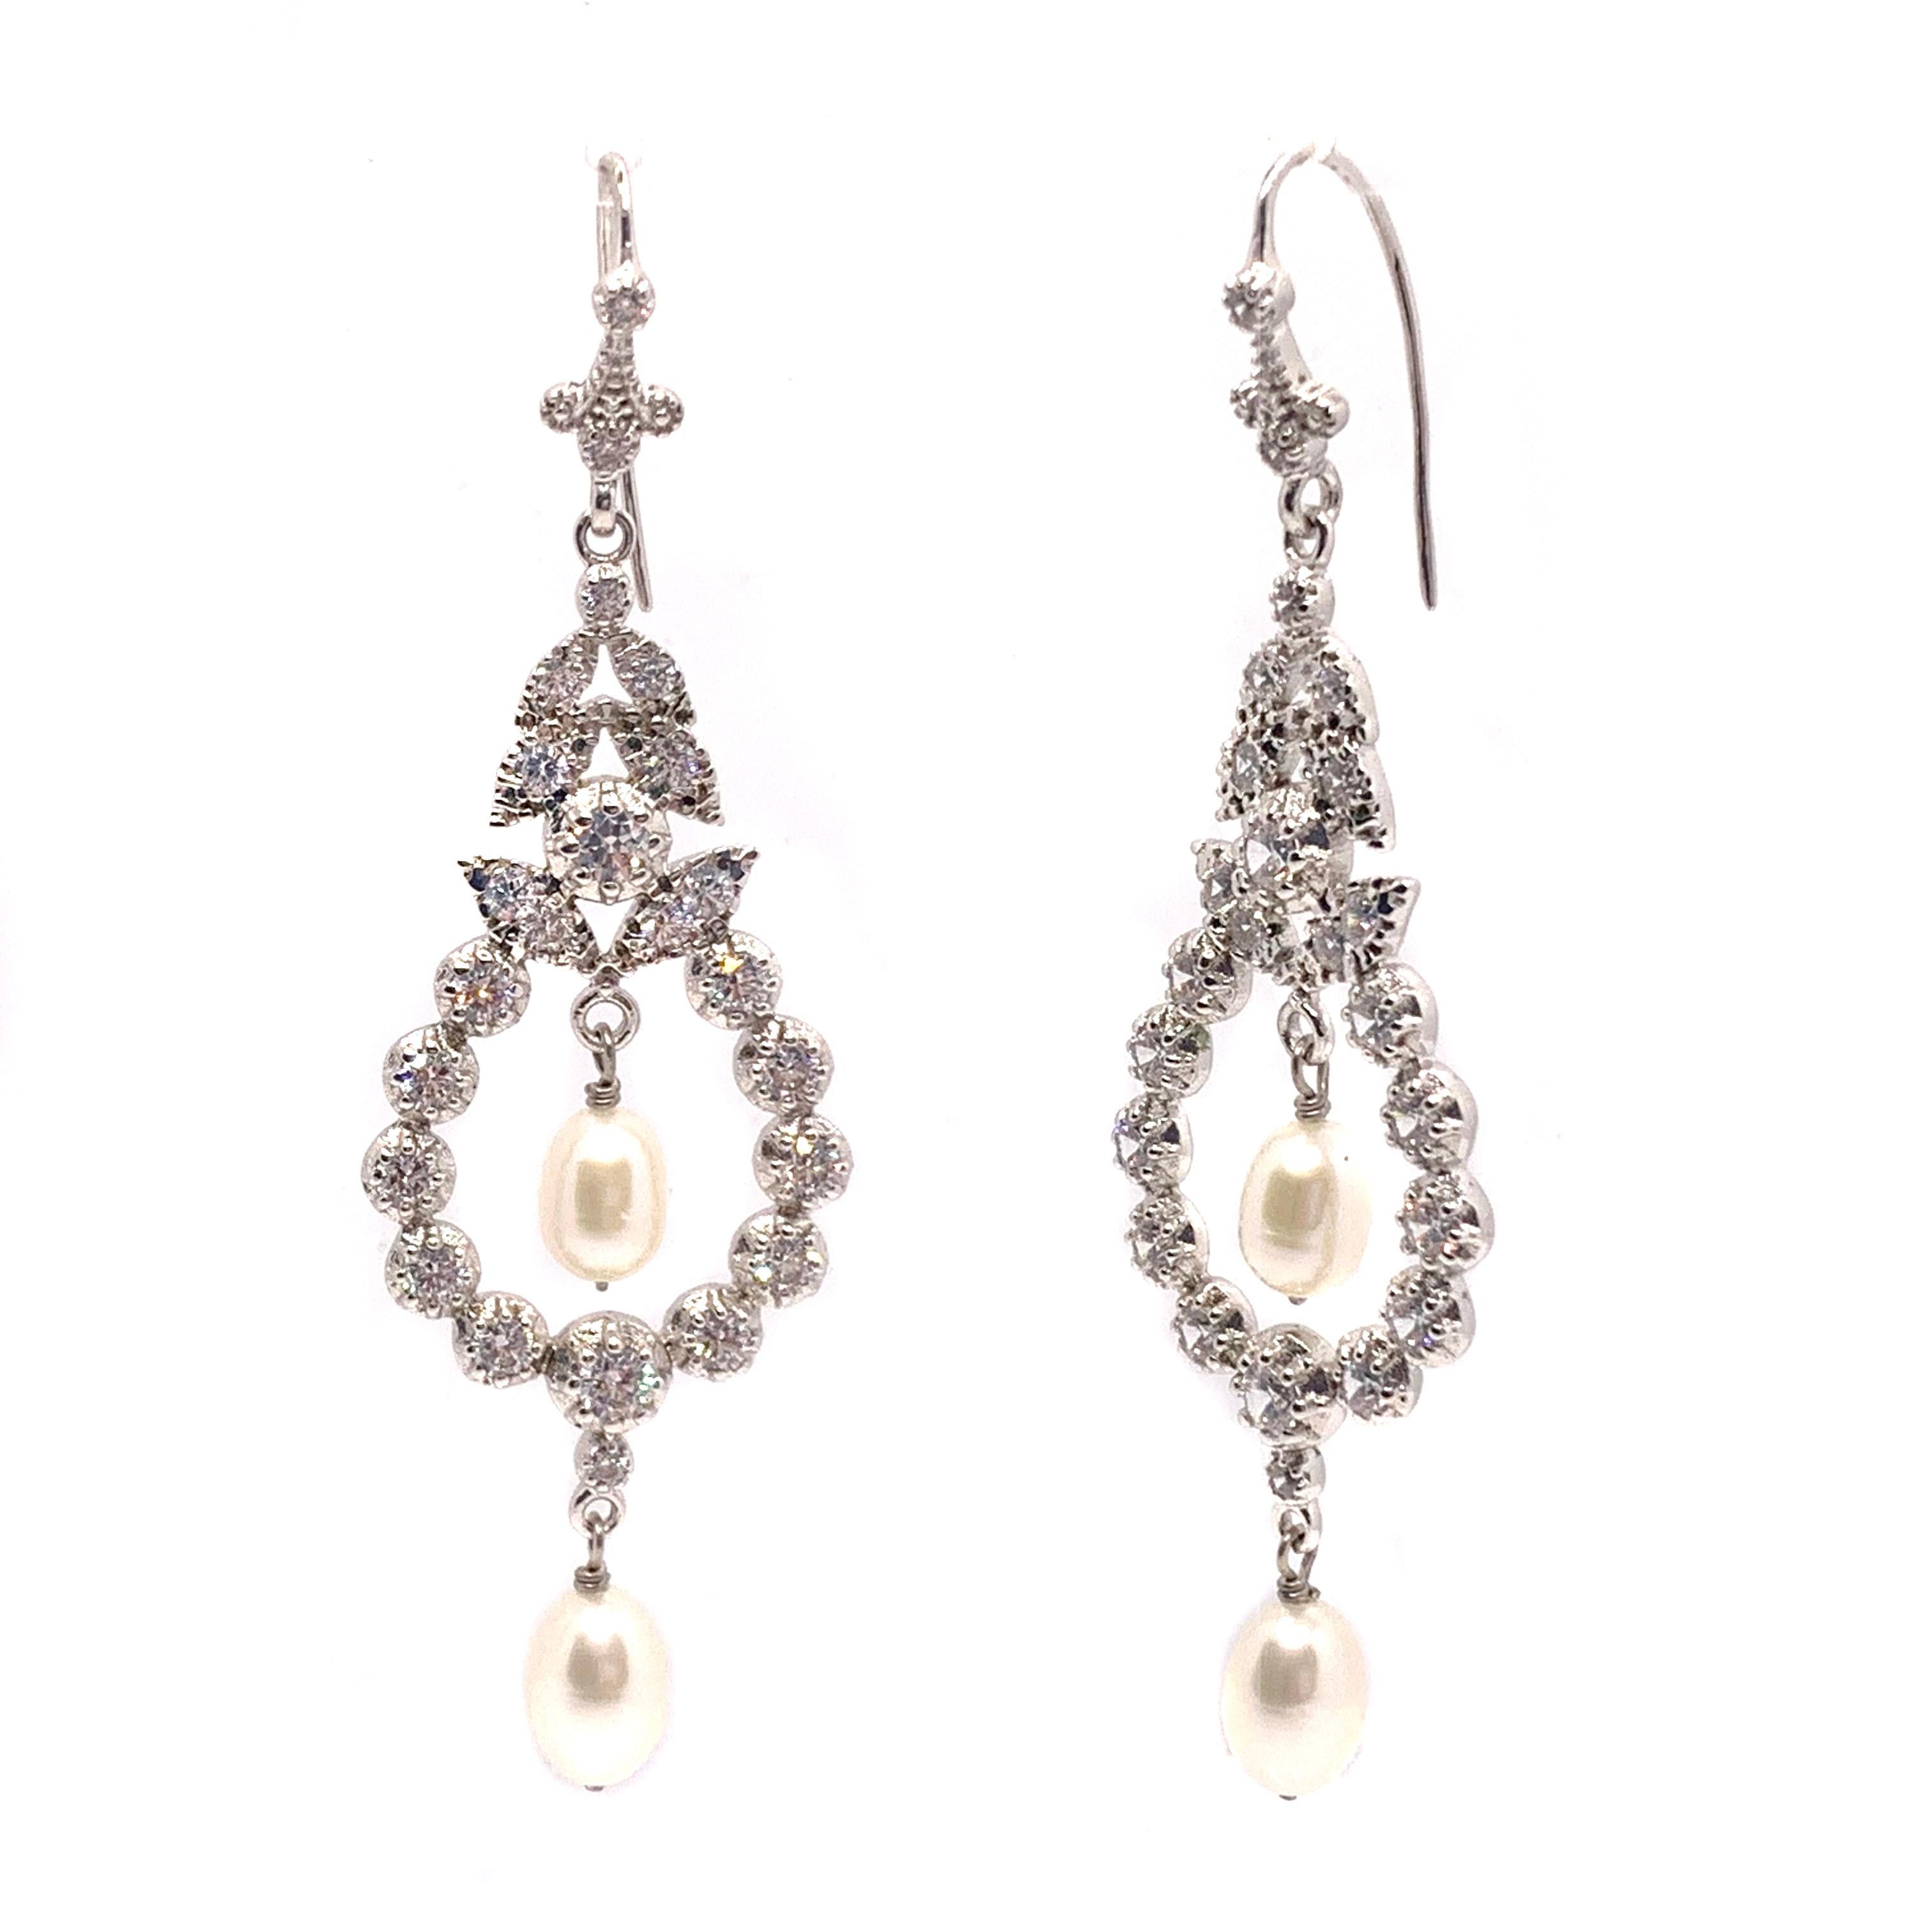 Art Deco Style Double Freshwater Pearl Drop Hook Earrings

These stunning Art Deco style earrings feature two pair of lustrous freshwater pearls and 52pcs of round simulated diamond, handset in platinum rhodium plated sterling silver with fish hook.